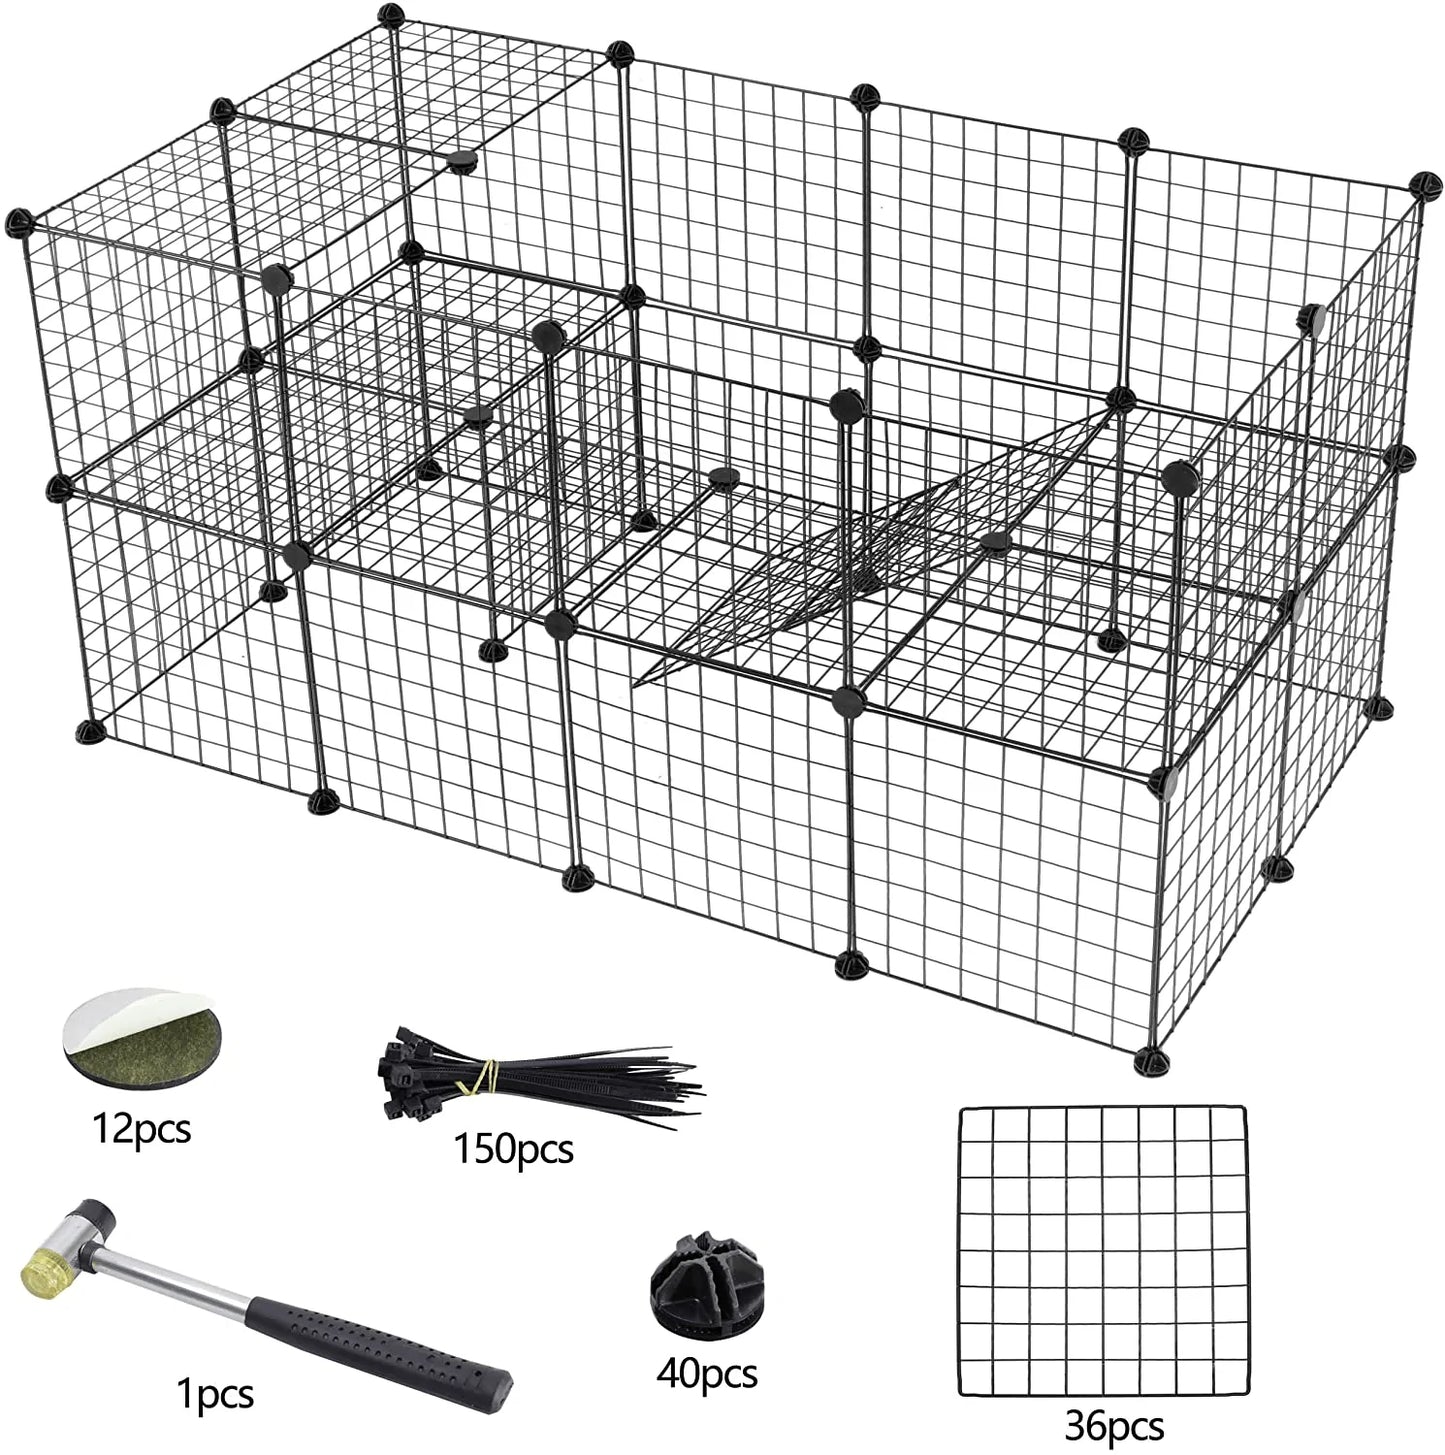 ZENY Pet Playpen for Small Animals, 36 Panels Portable Metal Wire Grid Cage Bunny Kennel Includes Cable Ties Indoor Outdoor Exercise Pen Play Yard for Guinea Pigs, Rabbits, Ferret, Puppies Animals & Pet Supplies > Pet Supplies > Dog Supplies > Dog Kennels & Runs ZENY   